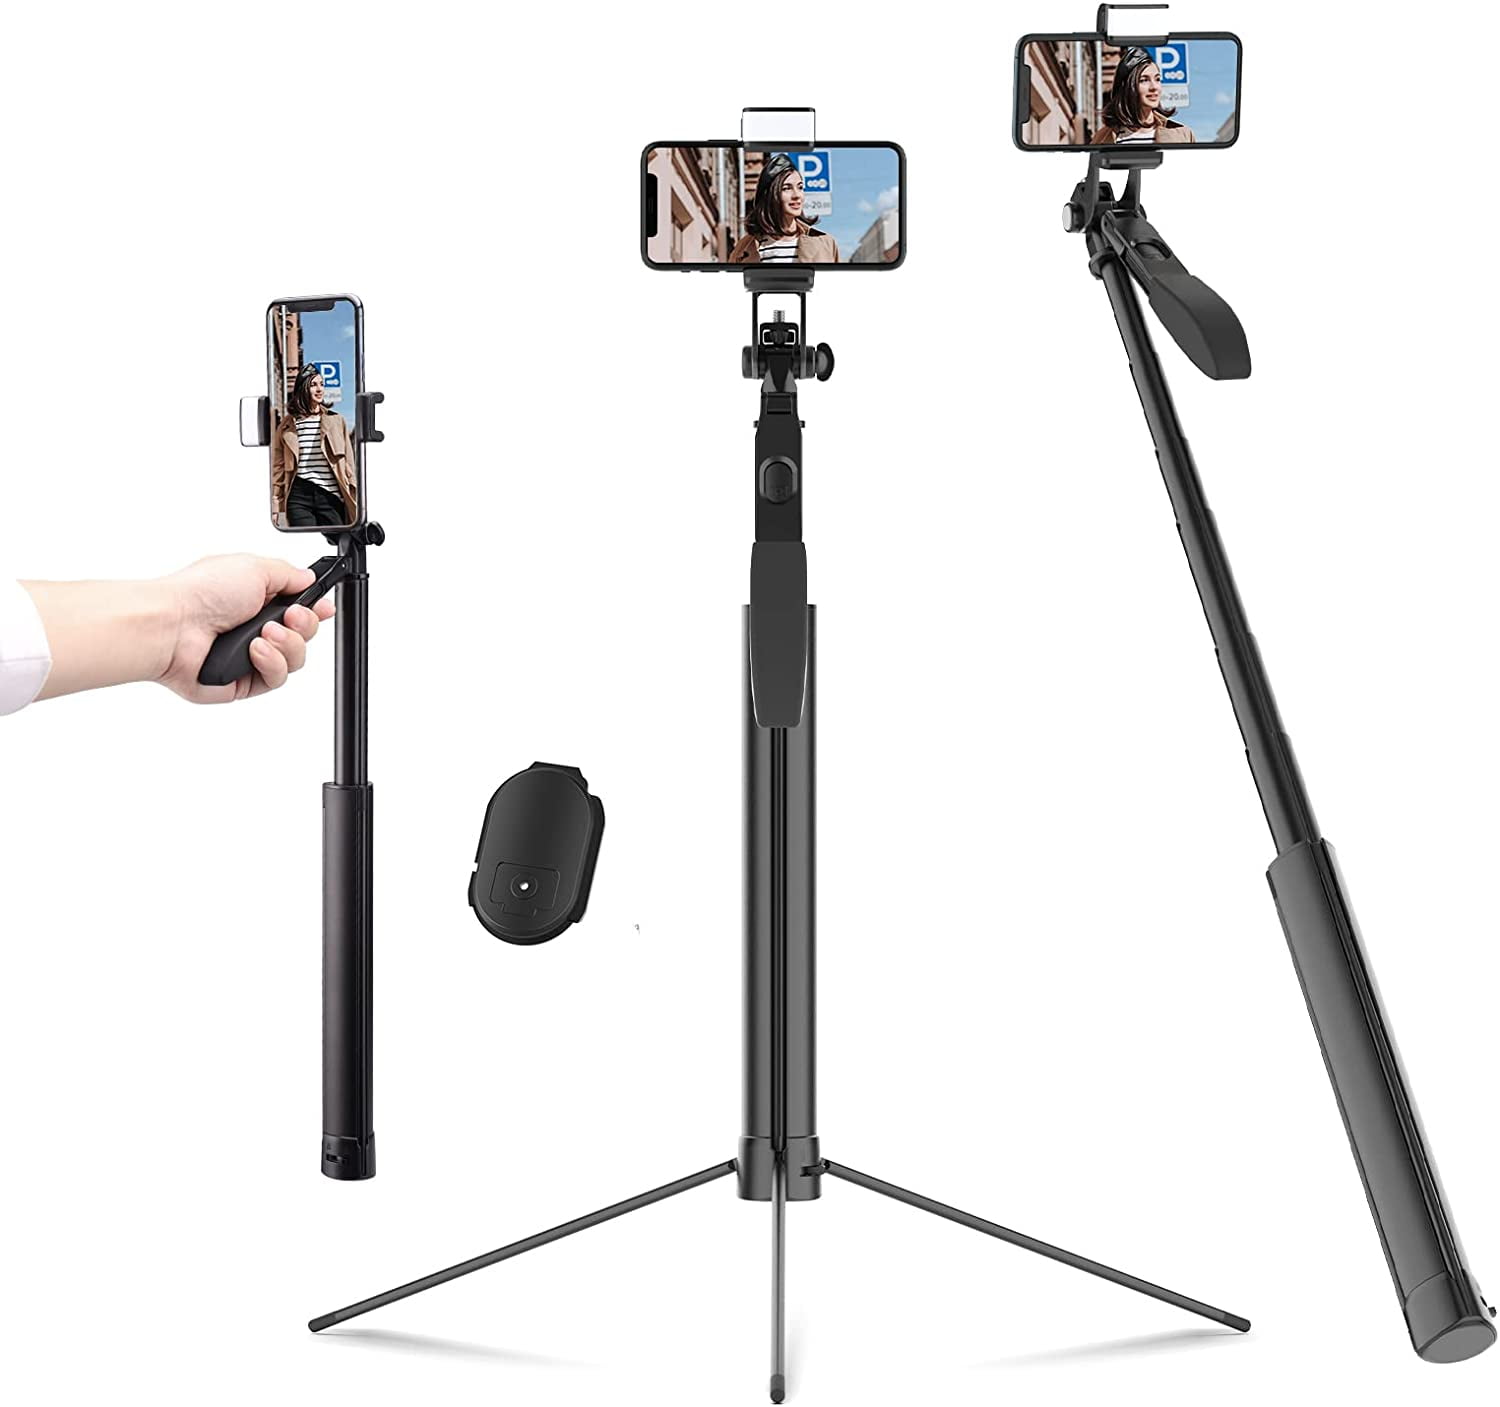 Extendable 3 in 1 Aluminum Selfie Stick with Wireless Remote and Tripod Stand 360 Rotation for iPhone Android Phone Outdoor Video Recording 43.3inch Bluetooth Selfie Sticks Tripod Vlogging 